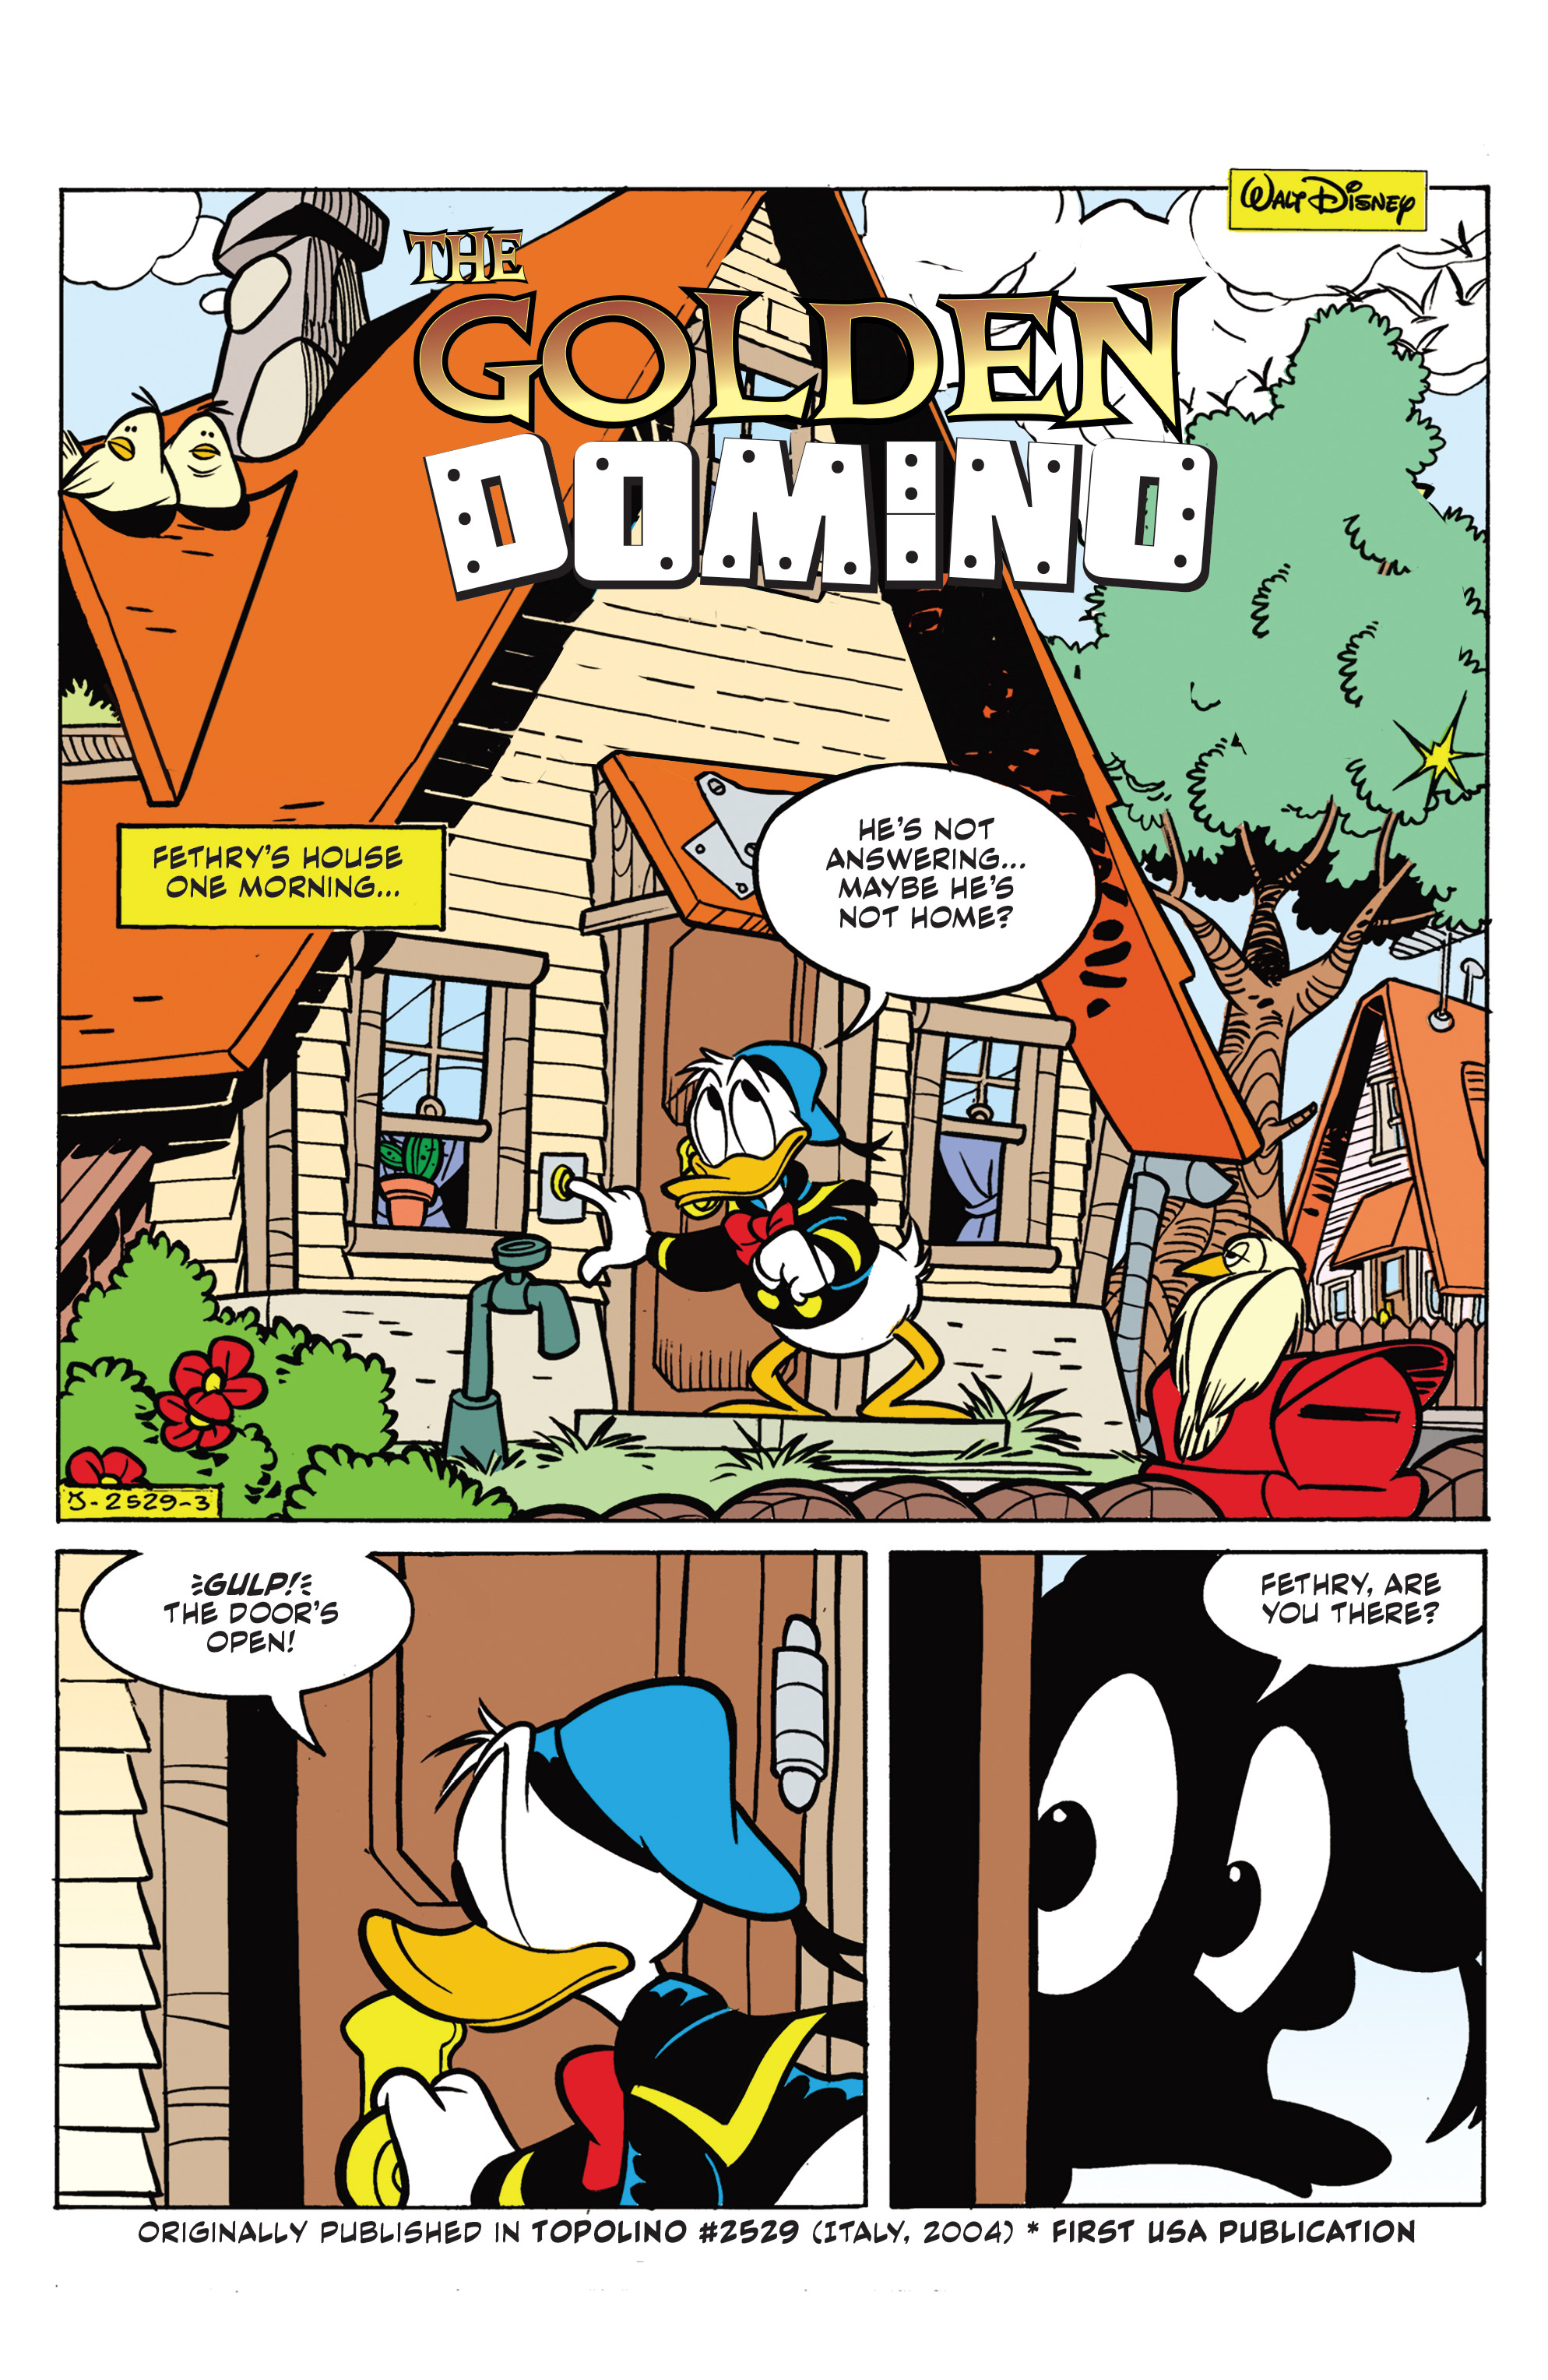 Disney Comics and Stories (2018-): Chapter 9 - Page 3